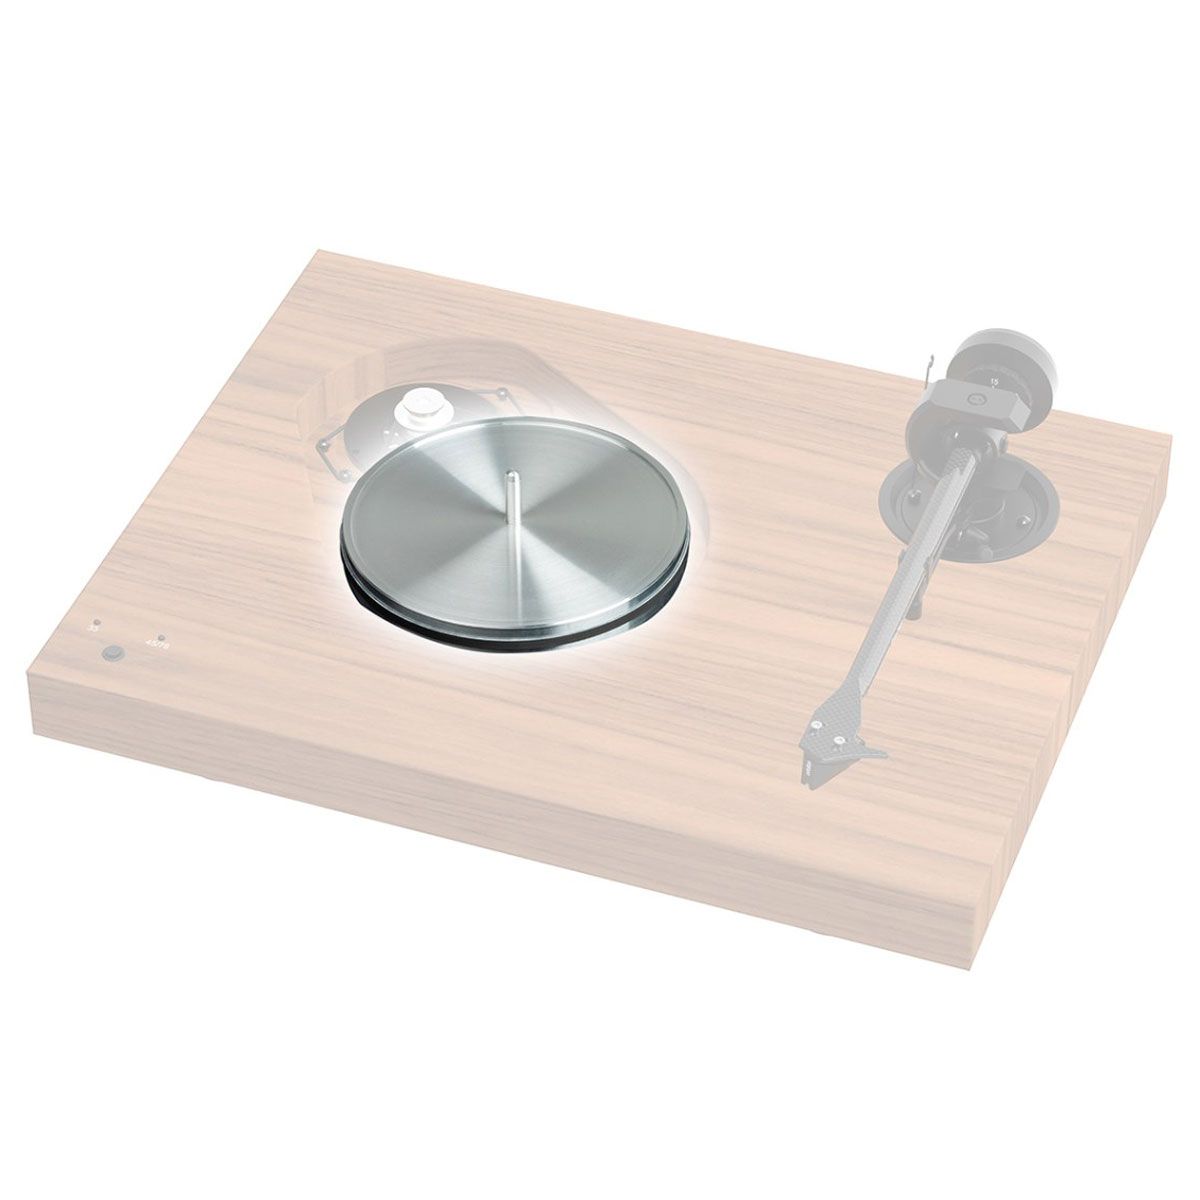 Pro-Ject Aluminum Subplatter for X1 and X2 Turntables